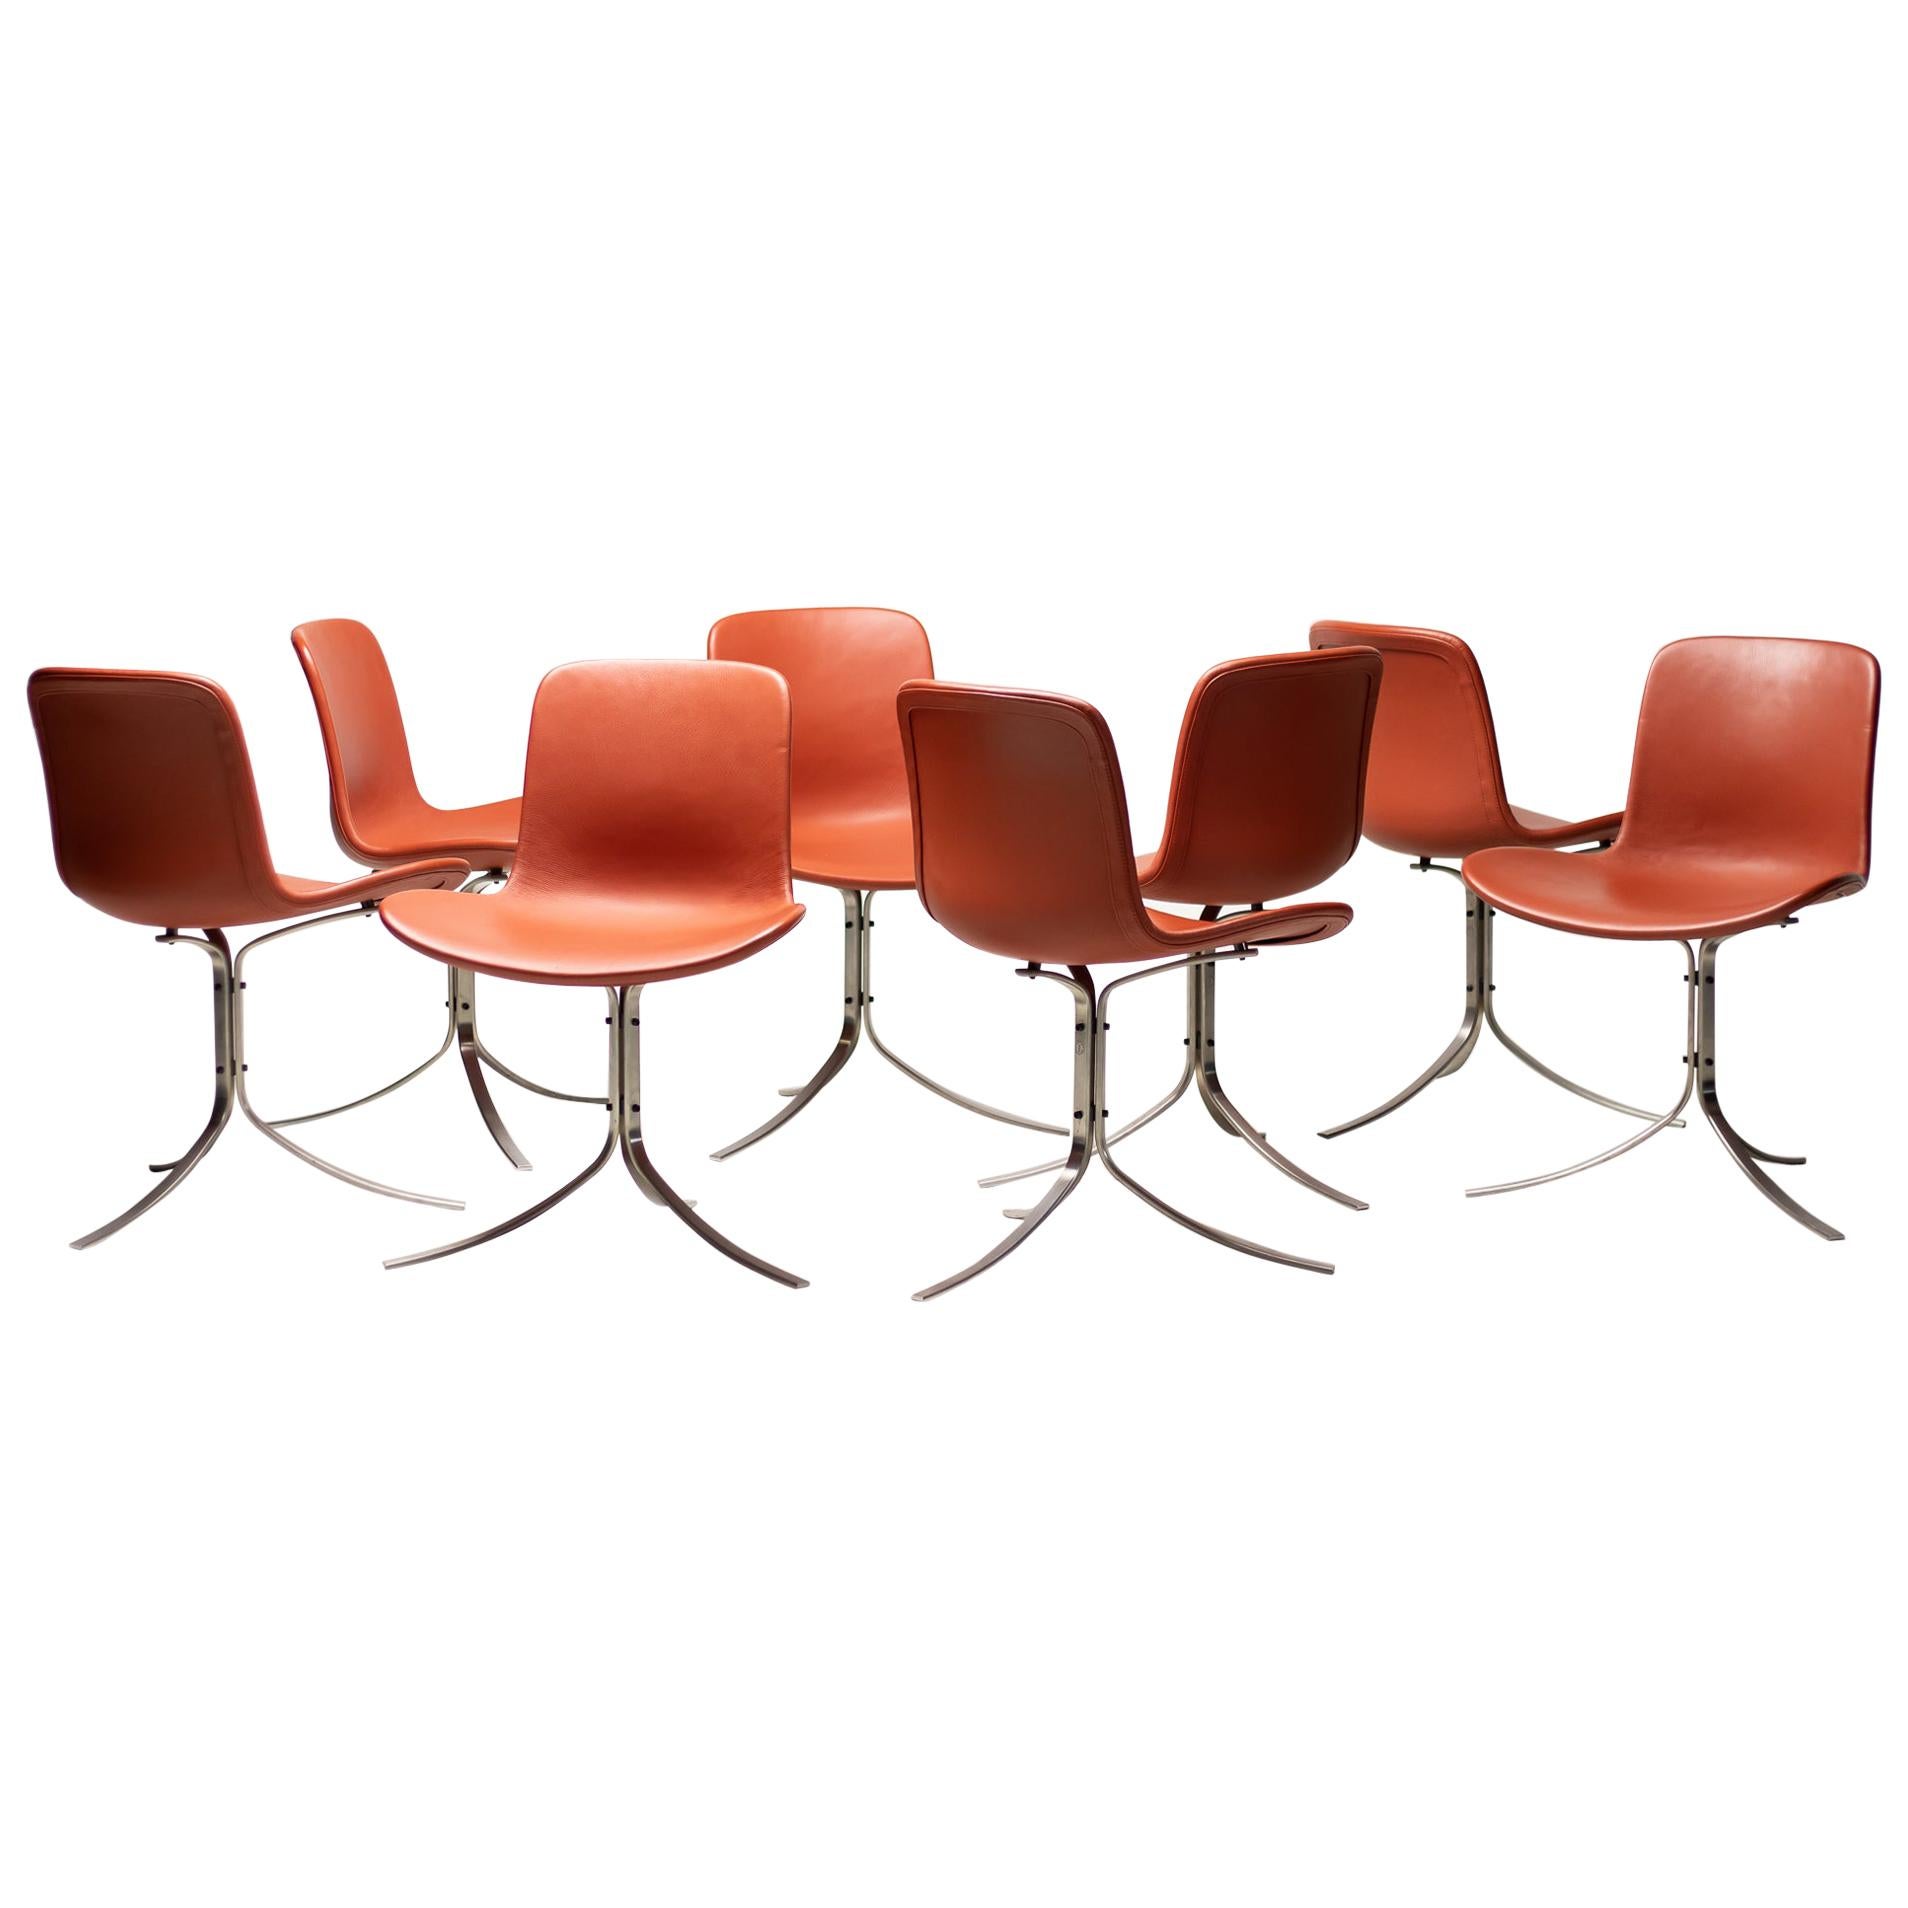 Set of Eight PK9 Chairs by Poul Kjaerholm for Fritz Hansen